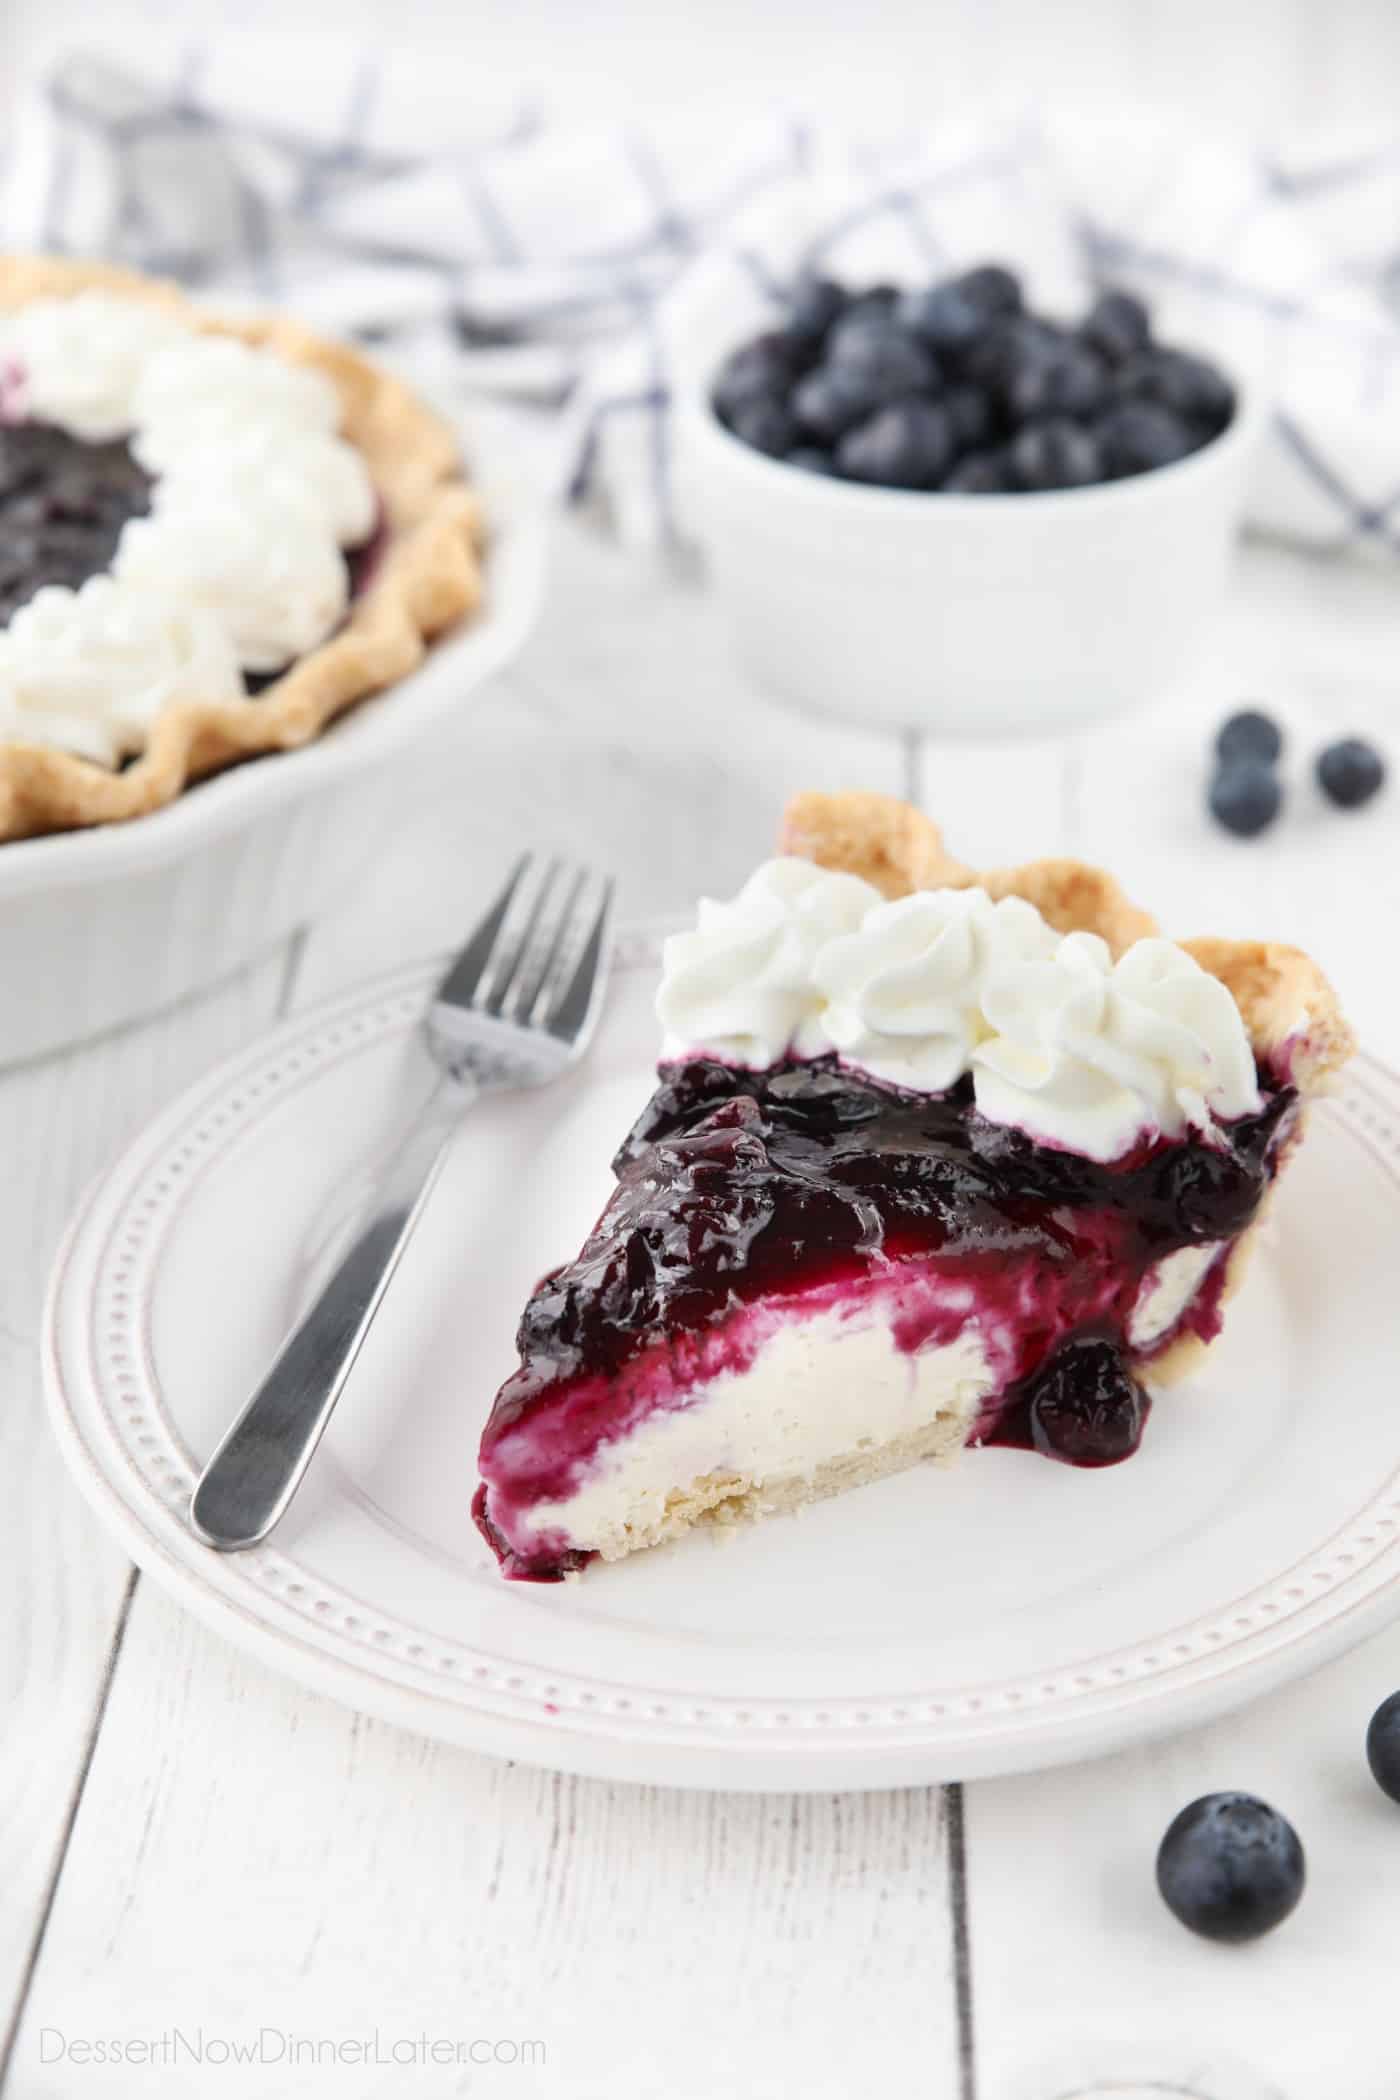 Share more than 73 blueberry cream cheese cake best - in.daotaonec